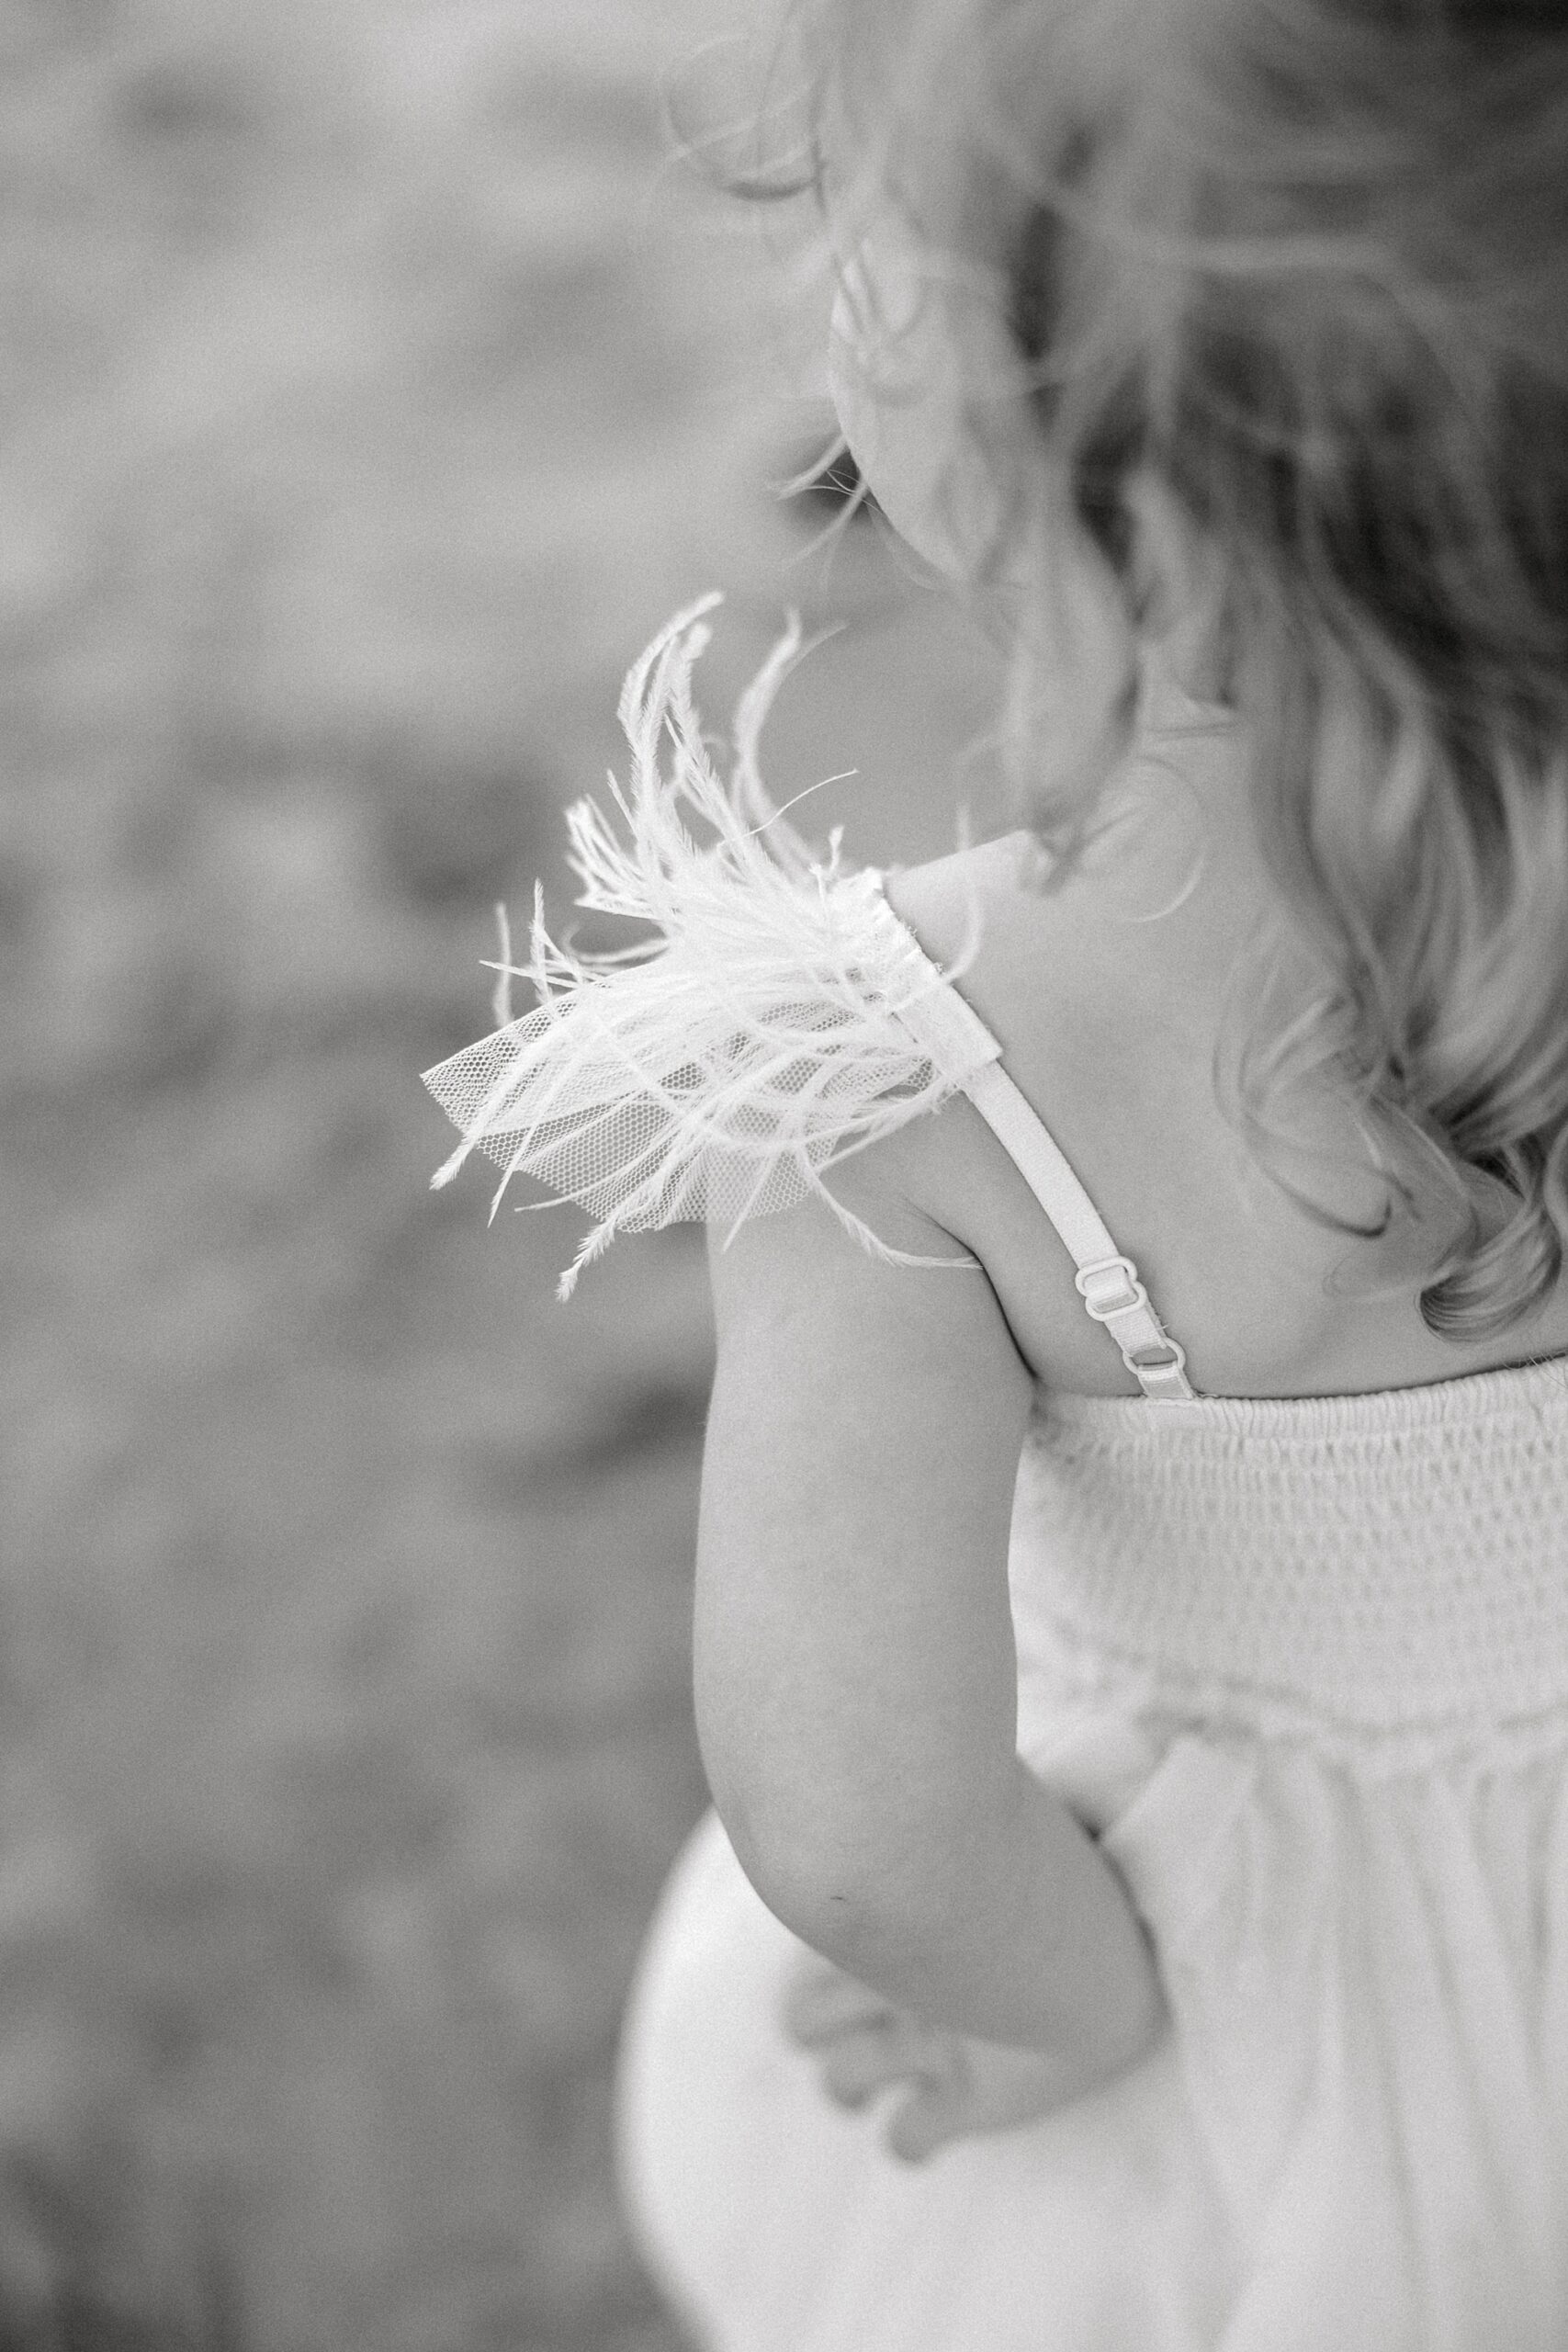 feather detailing on toddler's dress for Folly Beach family portraits